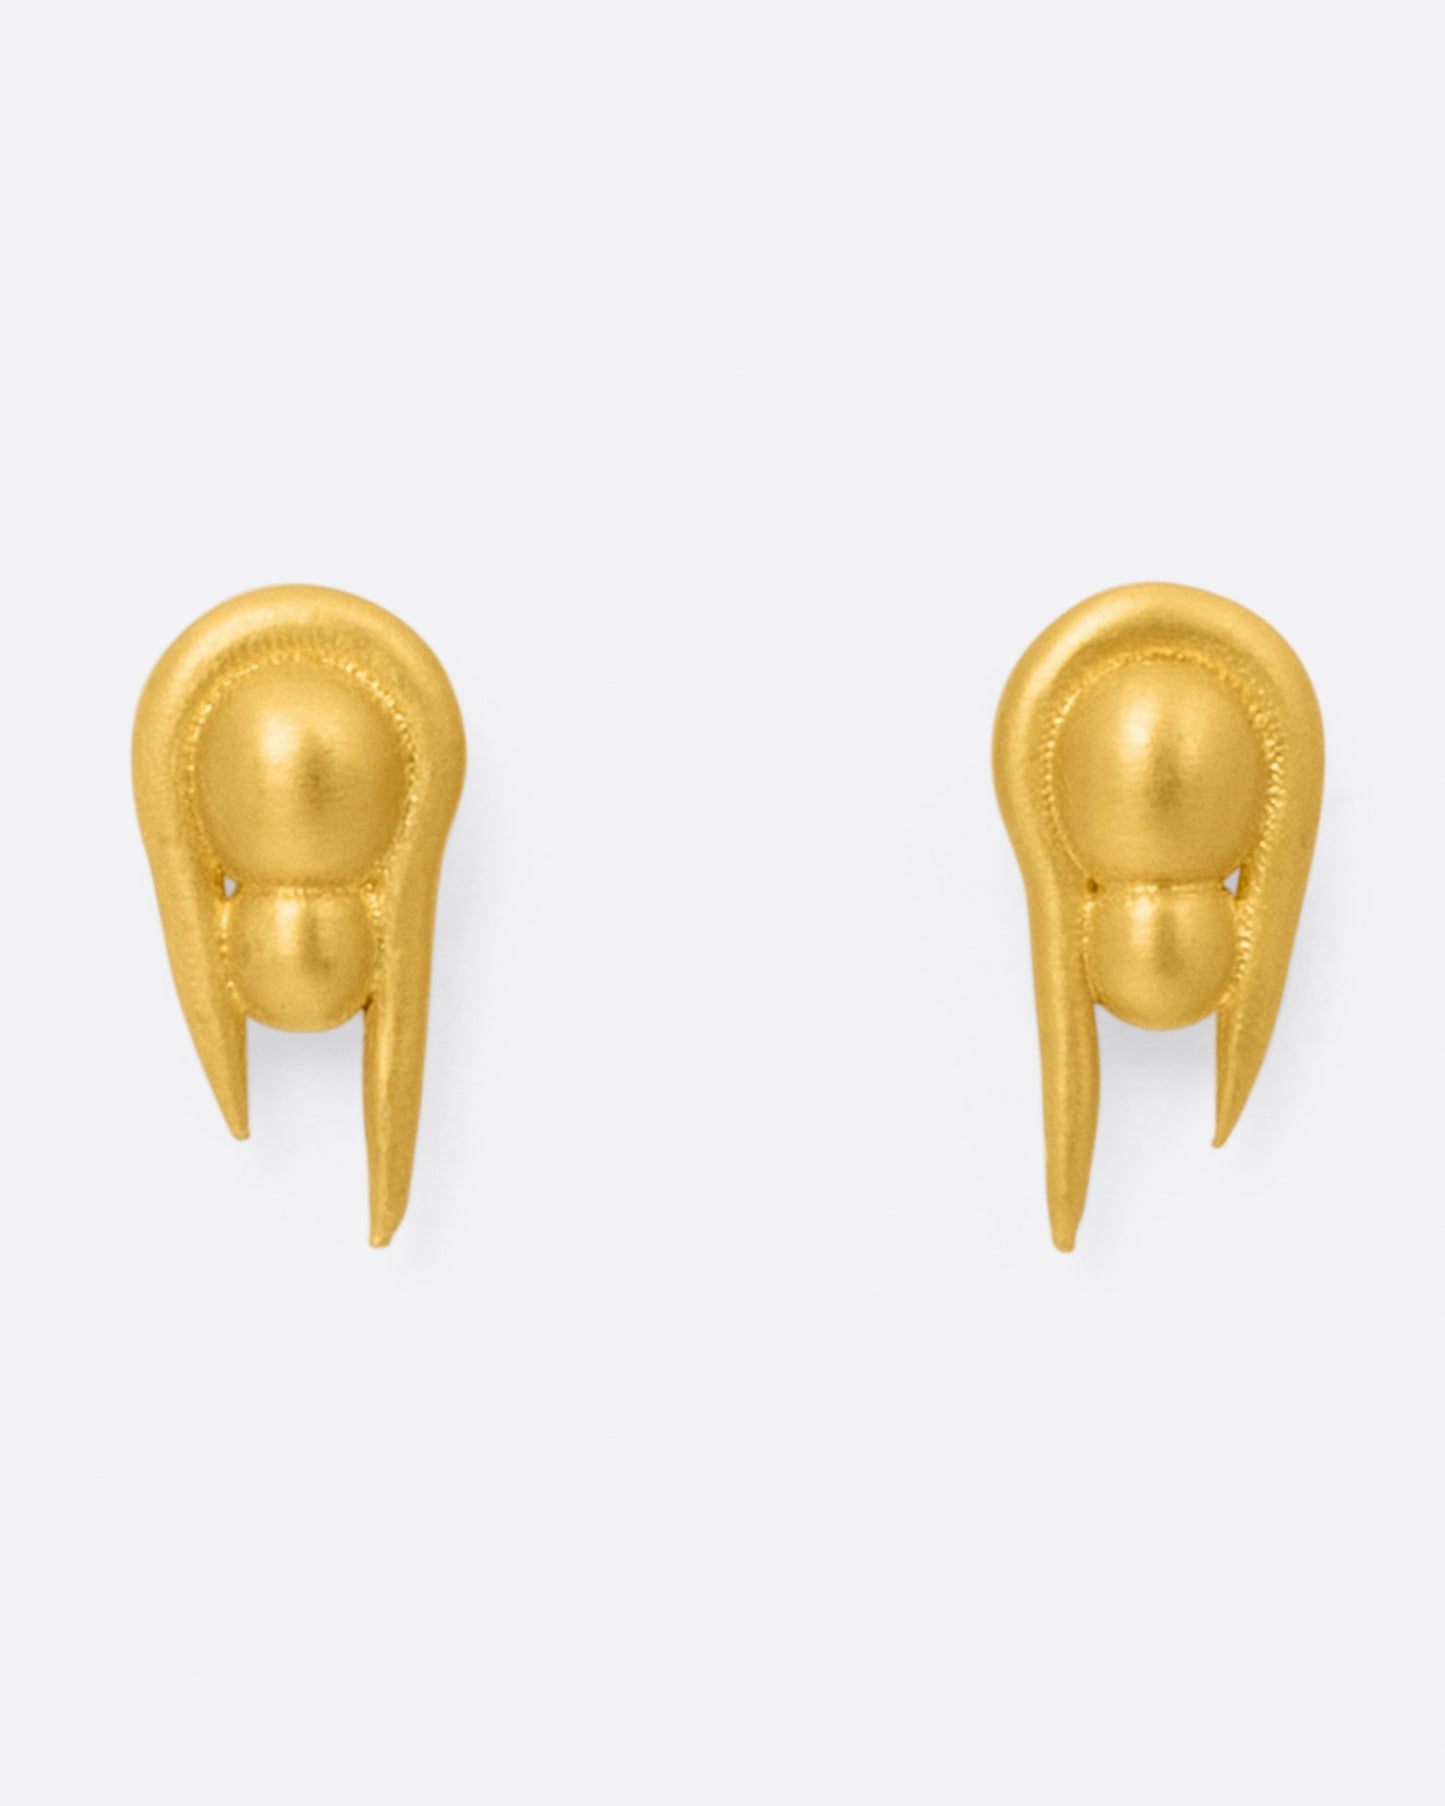 A pair of U-shaped high karat gold stud earrings with two stacked spheres at their centers, shown from the front.